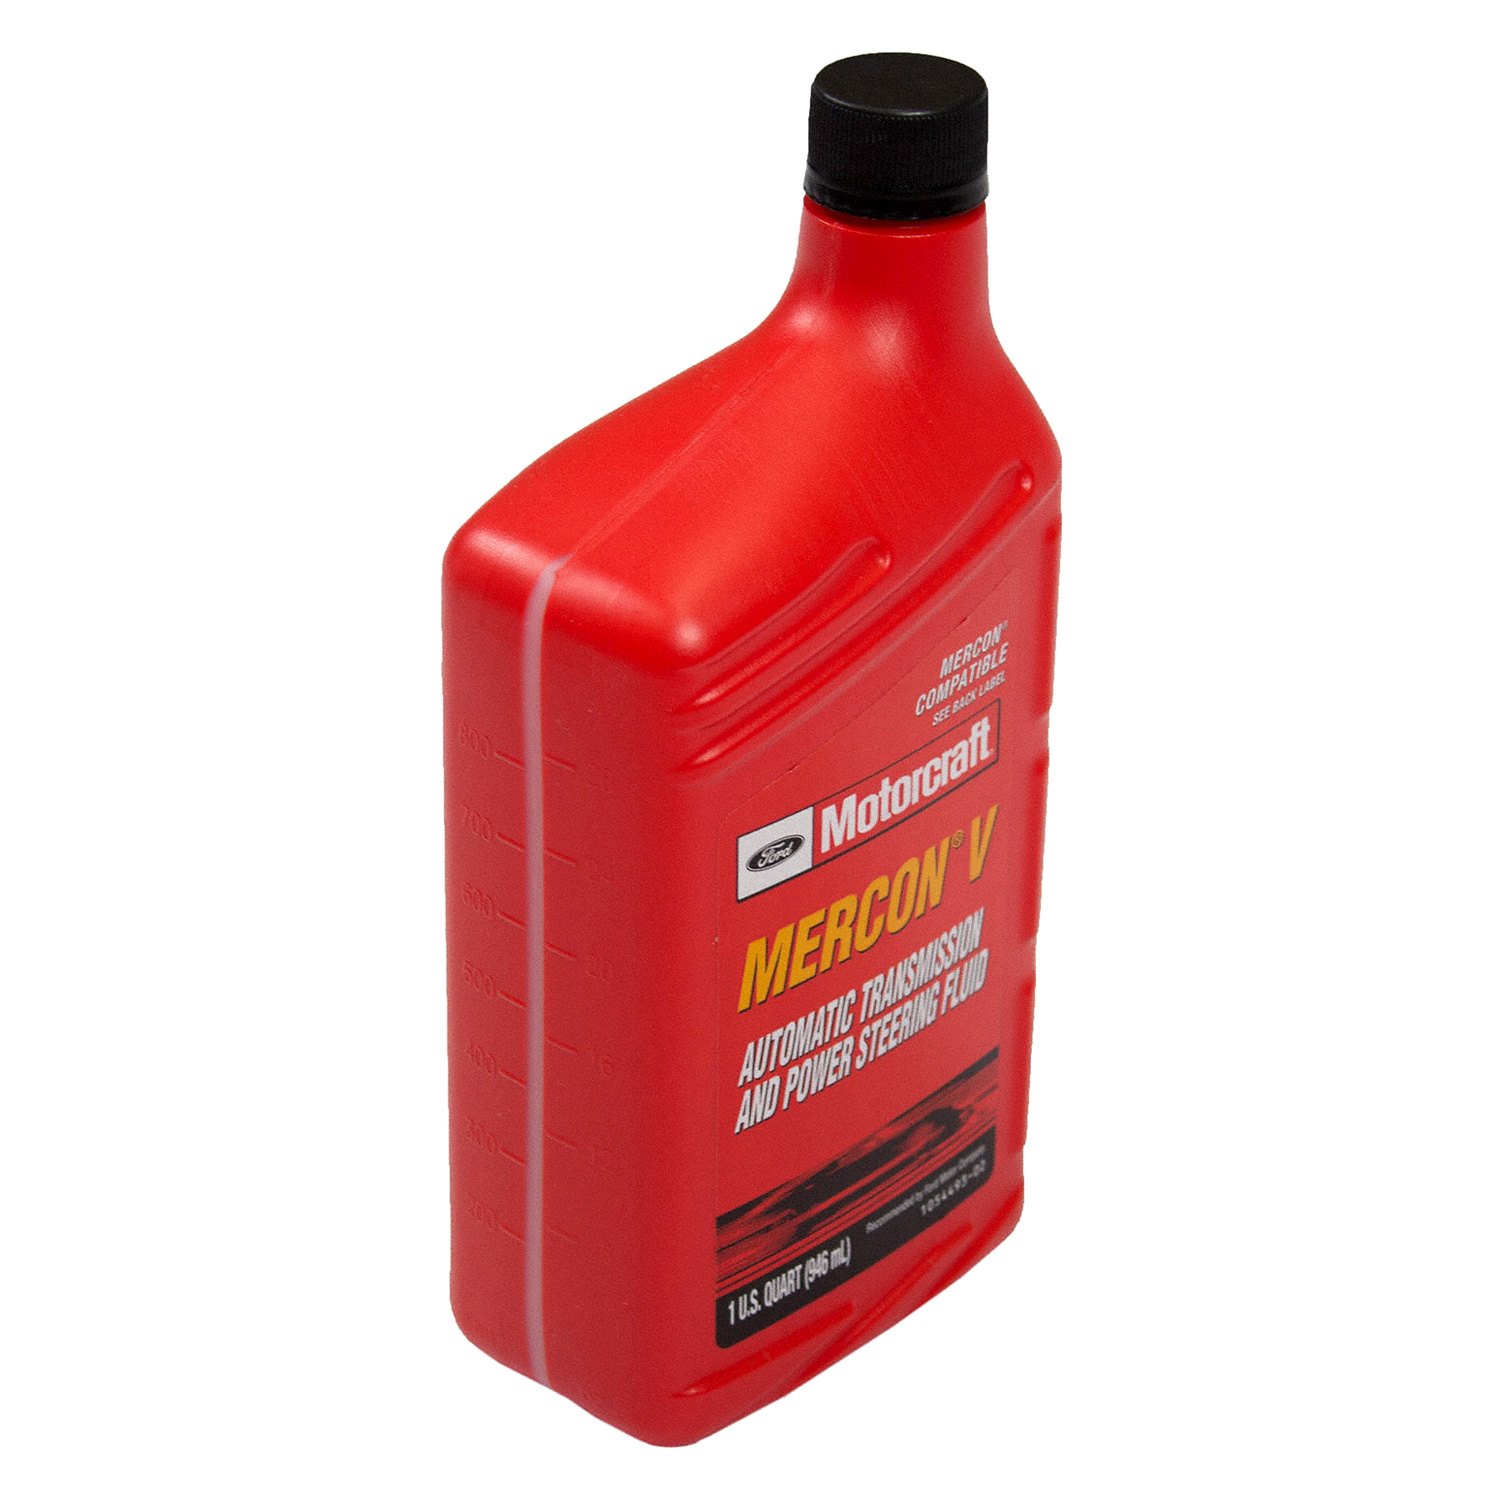 AT AUTO Shoppe - Ford Ranger T6 ATF fluid change #Motorcraft #Mercon LV  Genuine FORD ATF fluid Call us today to booking for ATF oil change 016-  2820 215 (Andrew) #ford #fordrangert6accessories #